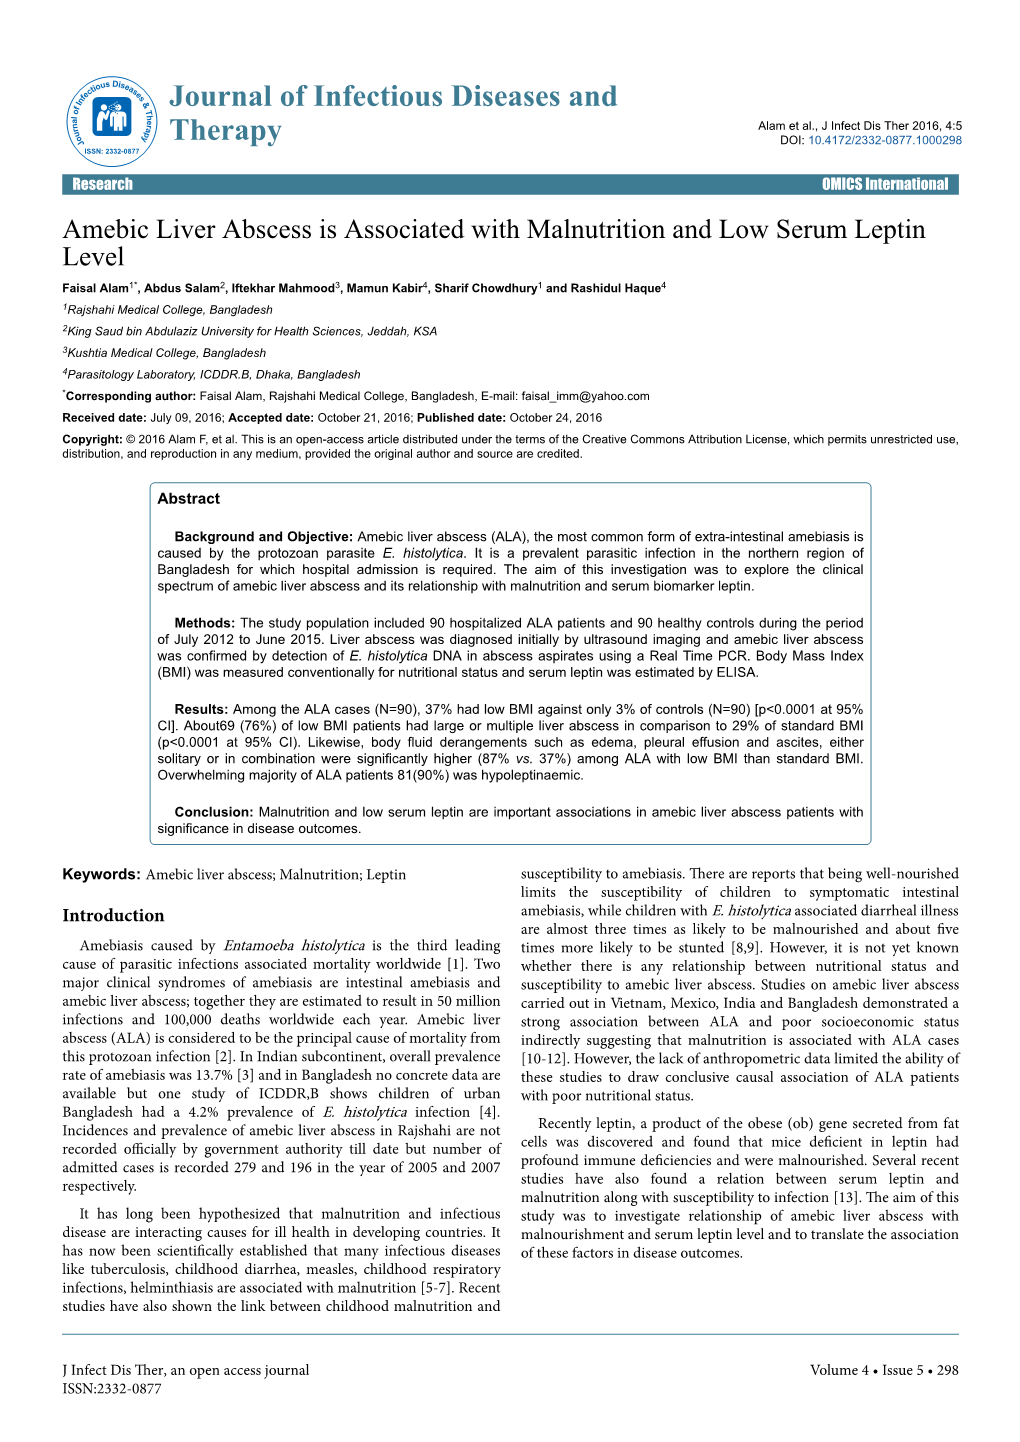 Amebic Liver Abscess Is Associated with Malnutrition and Low